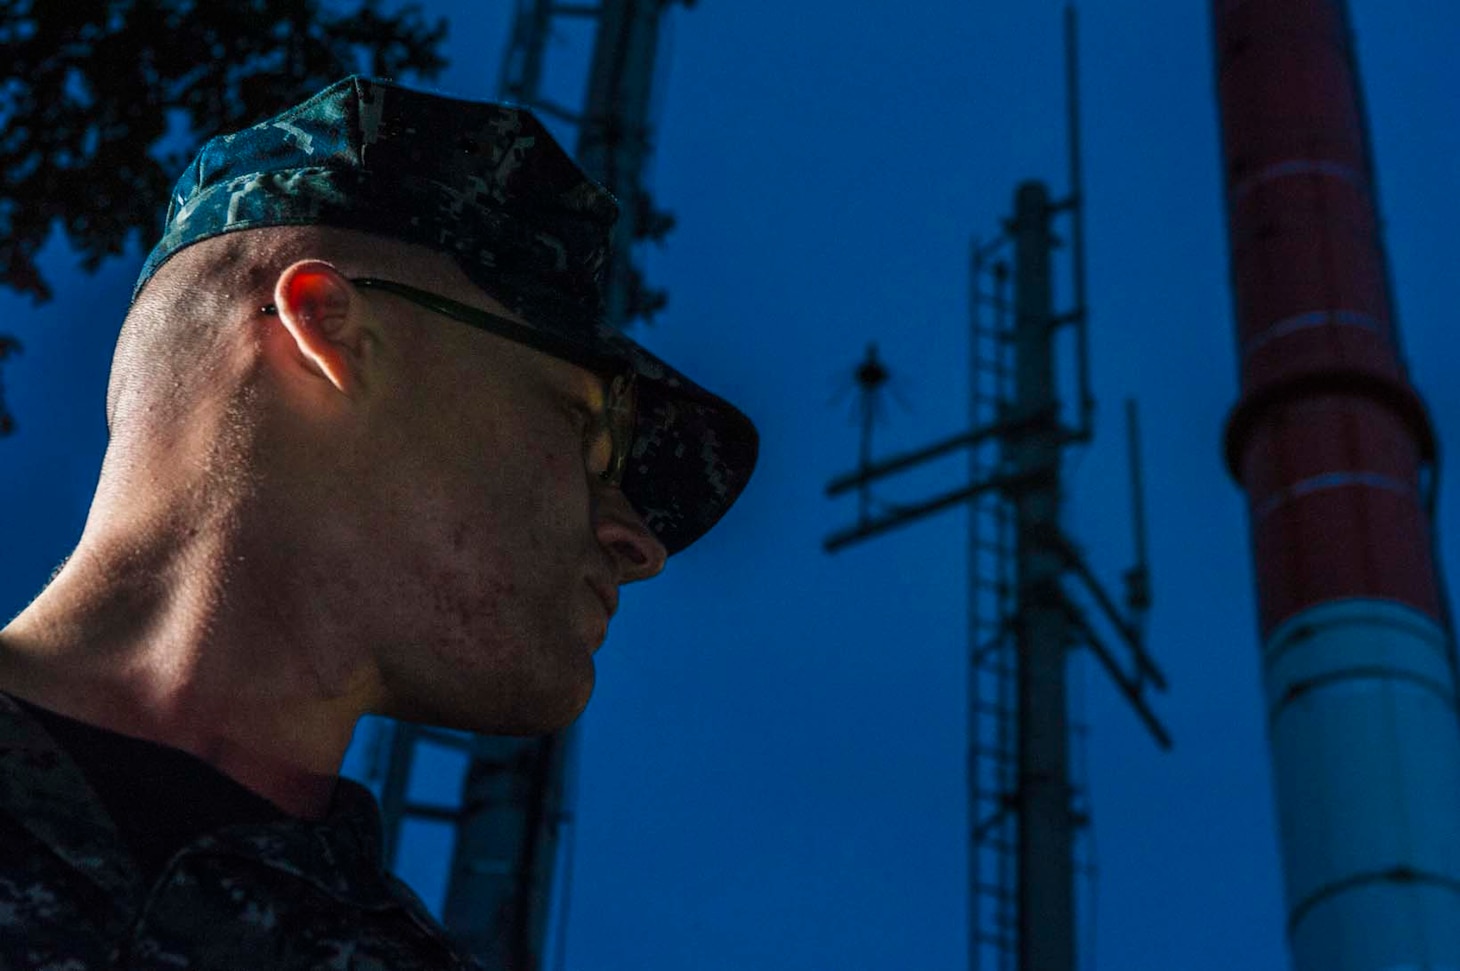 Petty Officer 2nd Class Brandon Armstrong, a meteorological forecaster, stands under the Automated Surface Observing System (ASOS) at the Naval Oceanography Anti-Submarine Warfare Center on Yokosuka Naval Base.